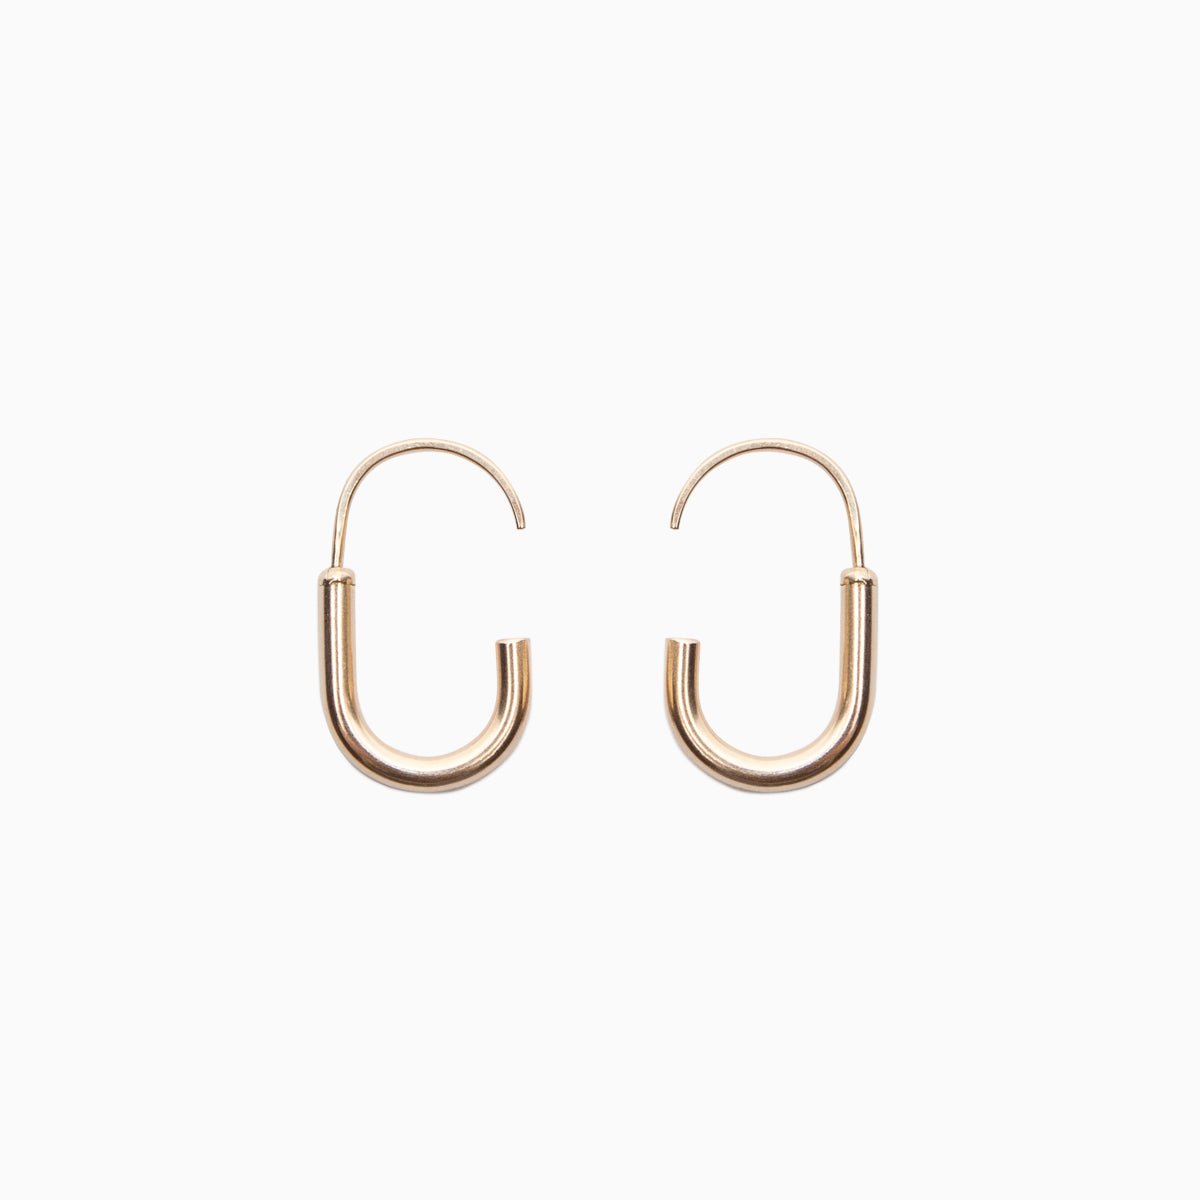 A mini gold-fill hoop U-shaped earring with an arched gold-fill ear wire with a slight opening. Designed and handcrafted in Portland, Oregon.